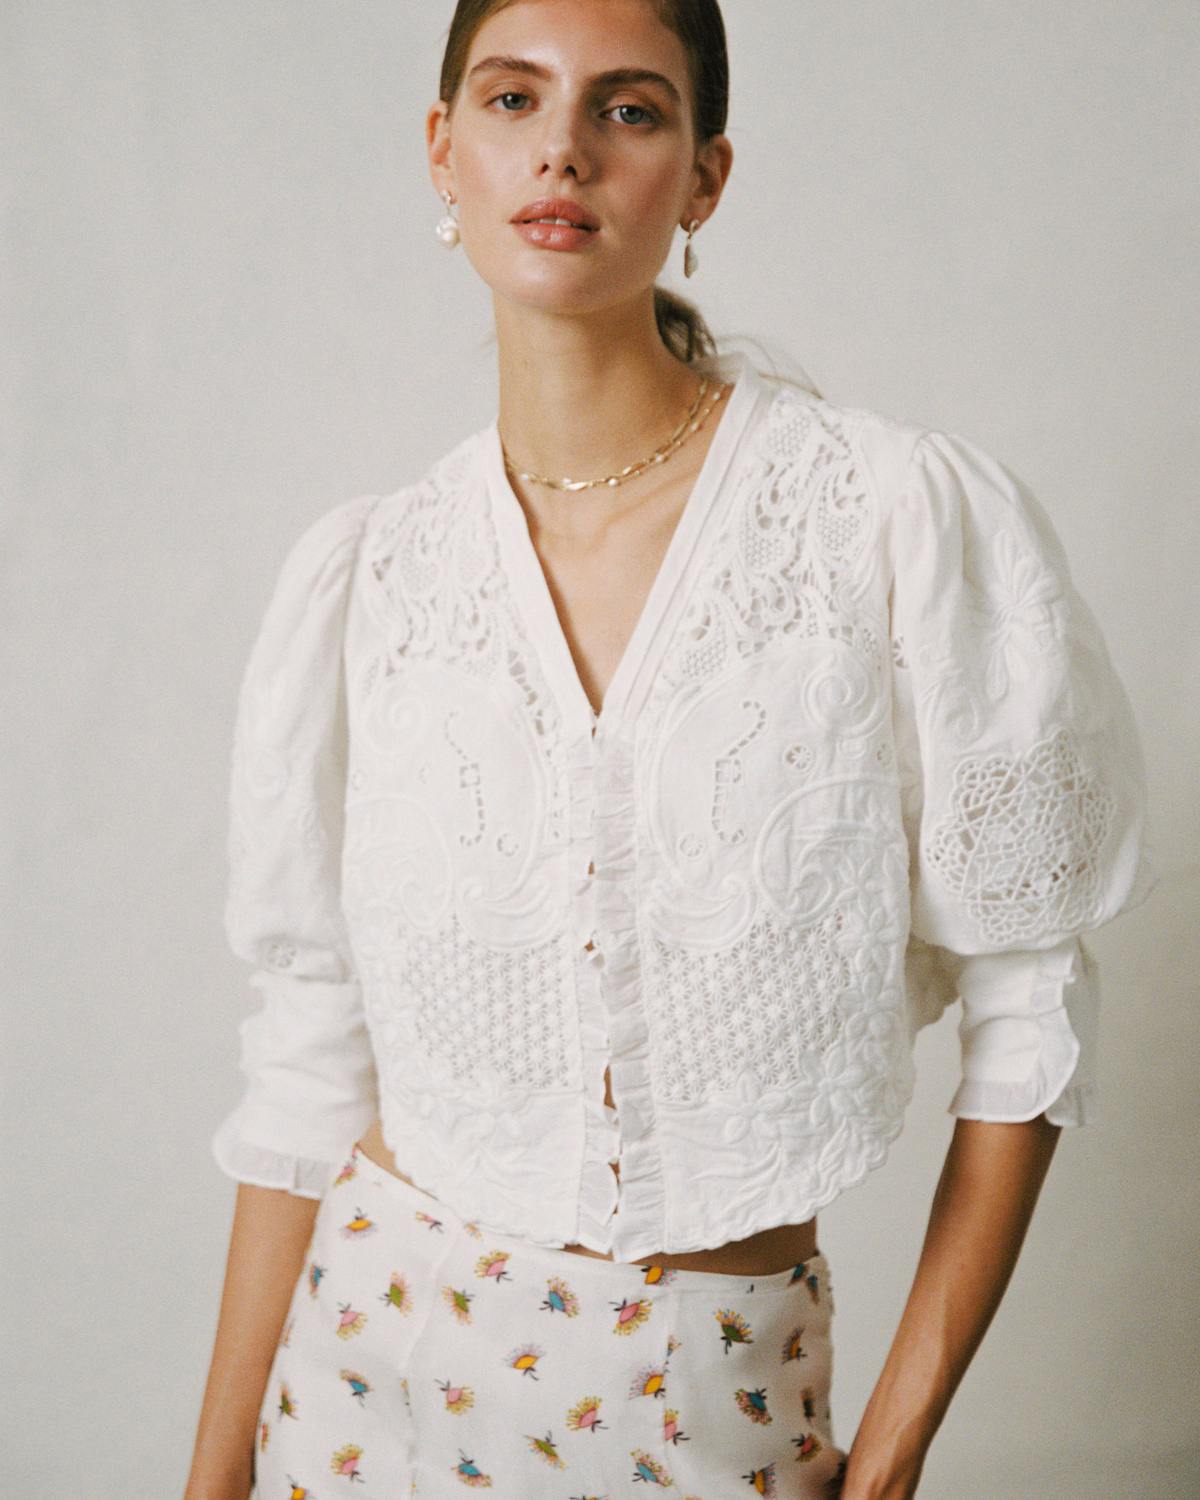 Linen Embroidery Jacket, White. Image #1